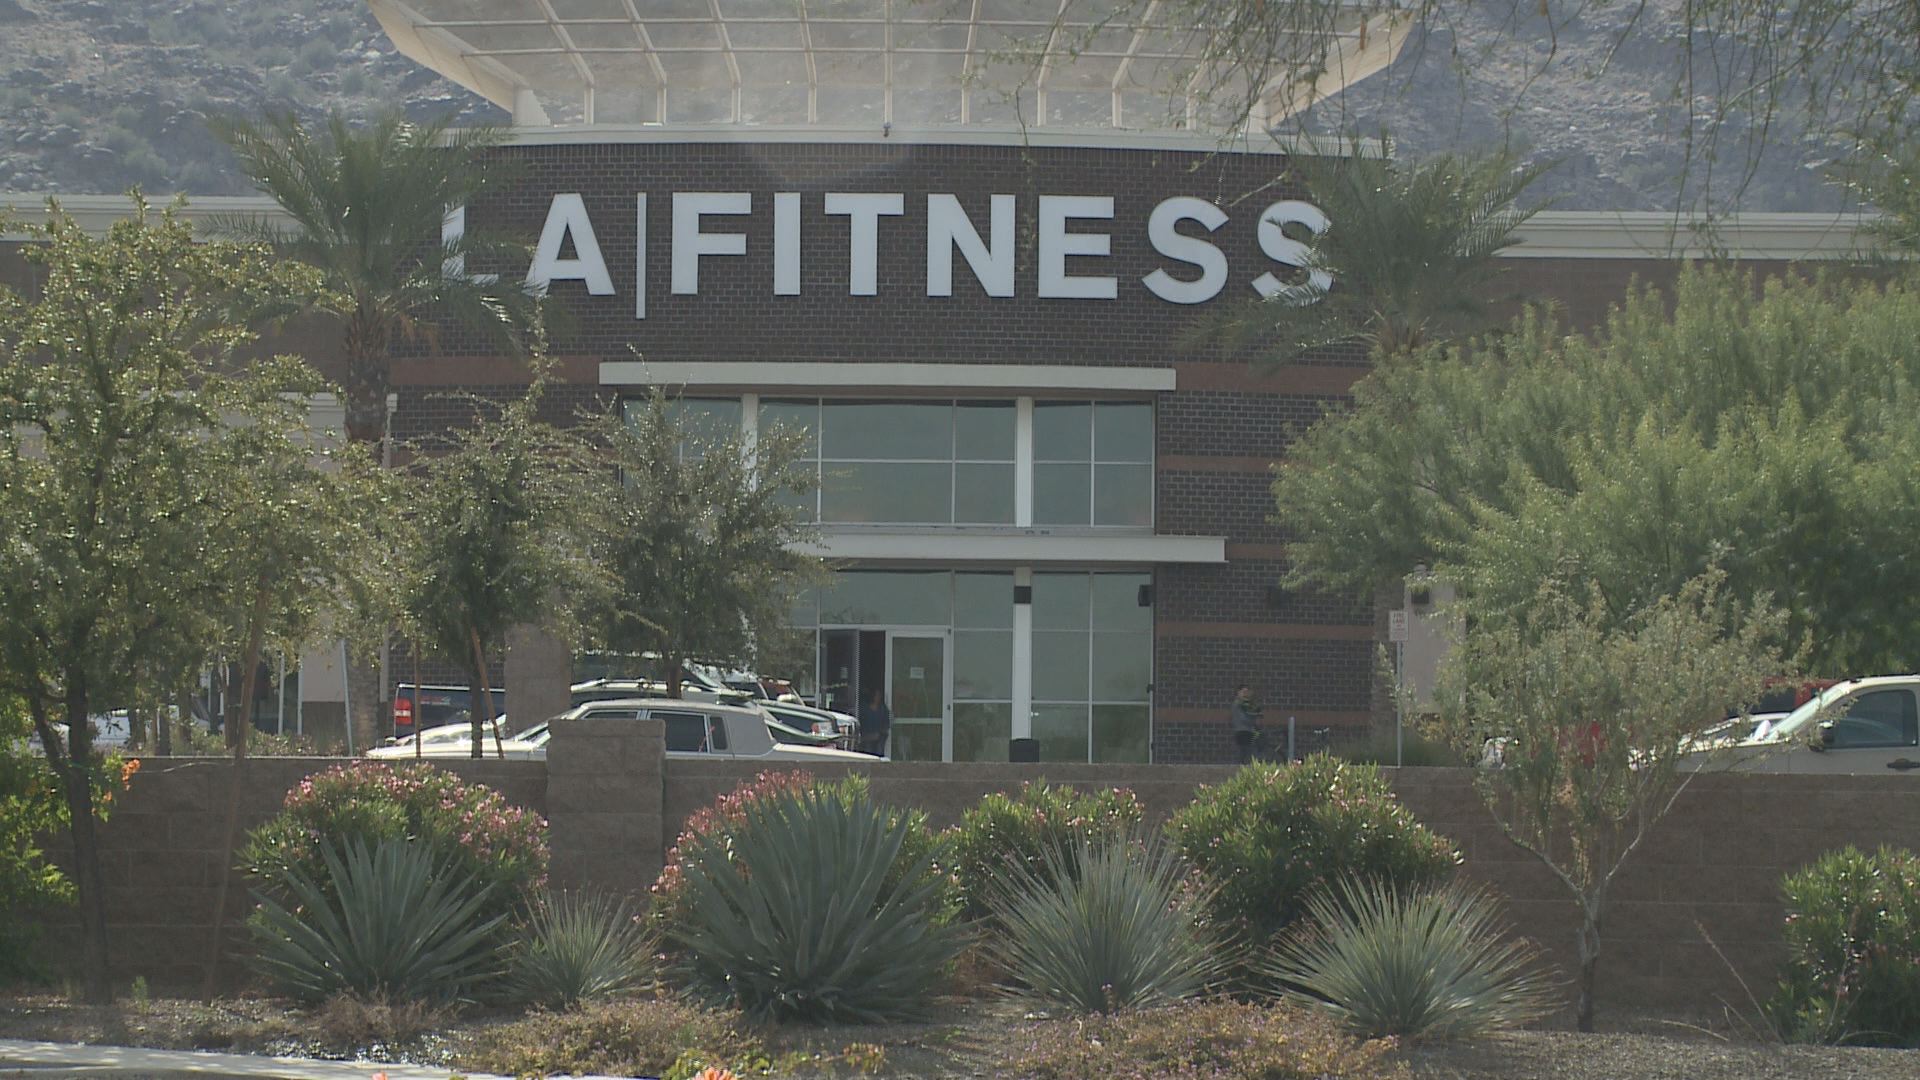 LA FITNESS TO HOST STATEWIDE EVENT ON SATURDAY, DECEMBER 3RD